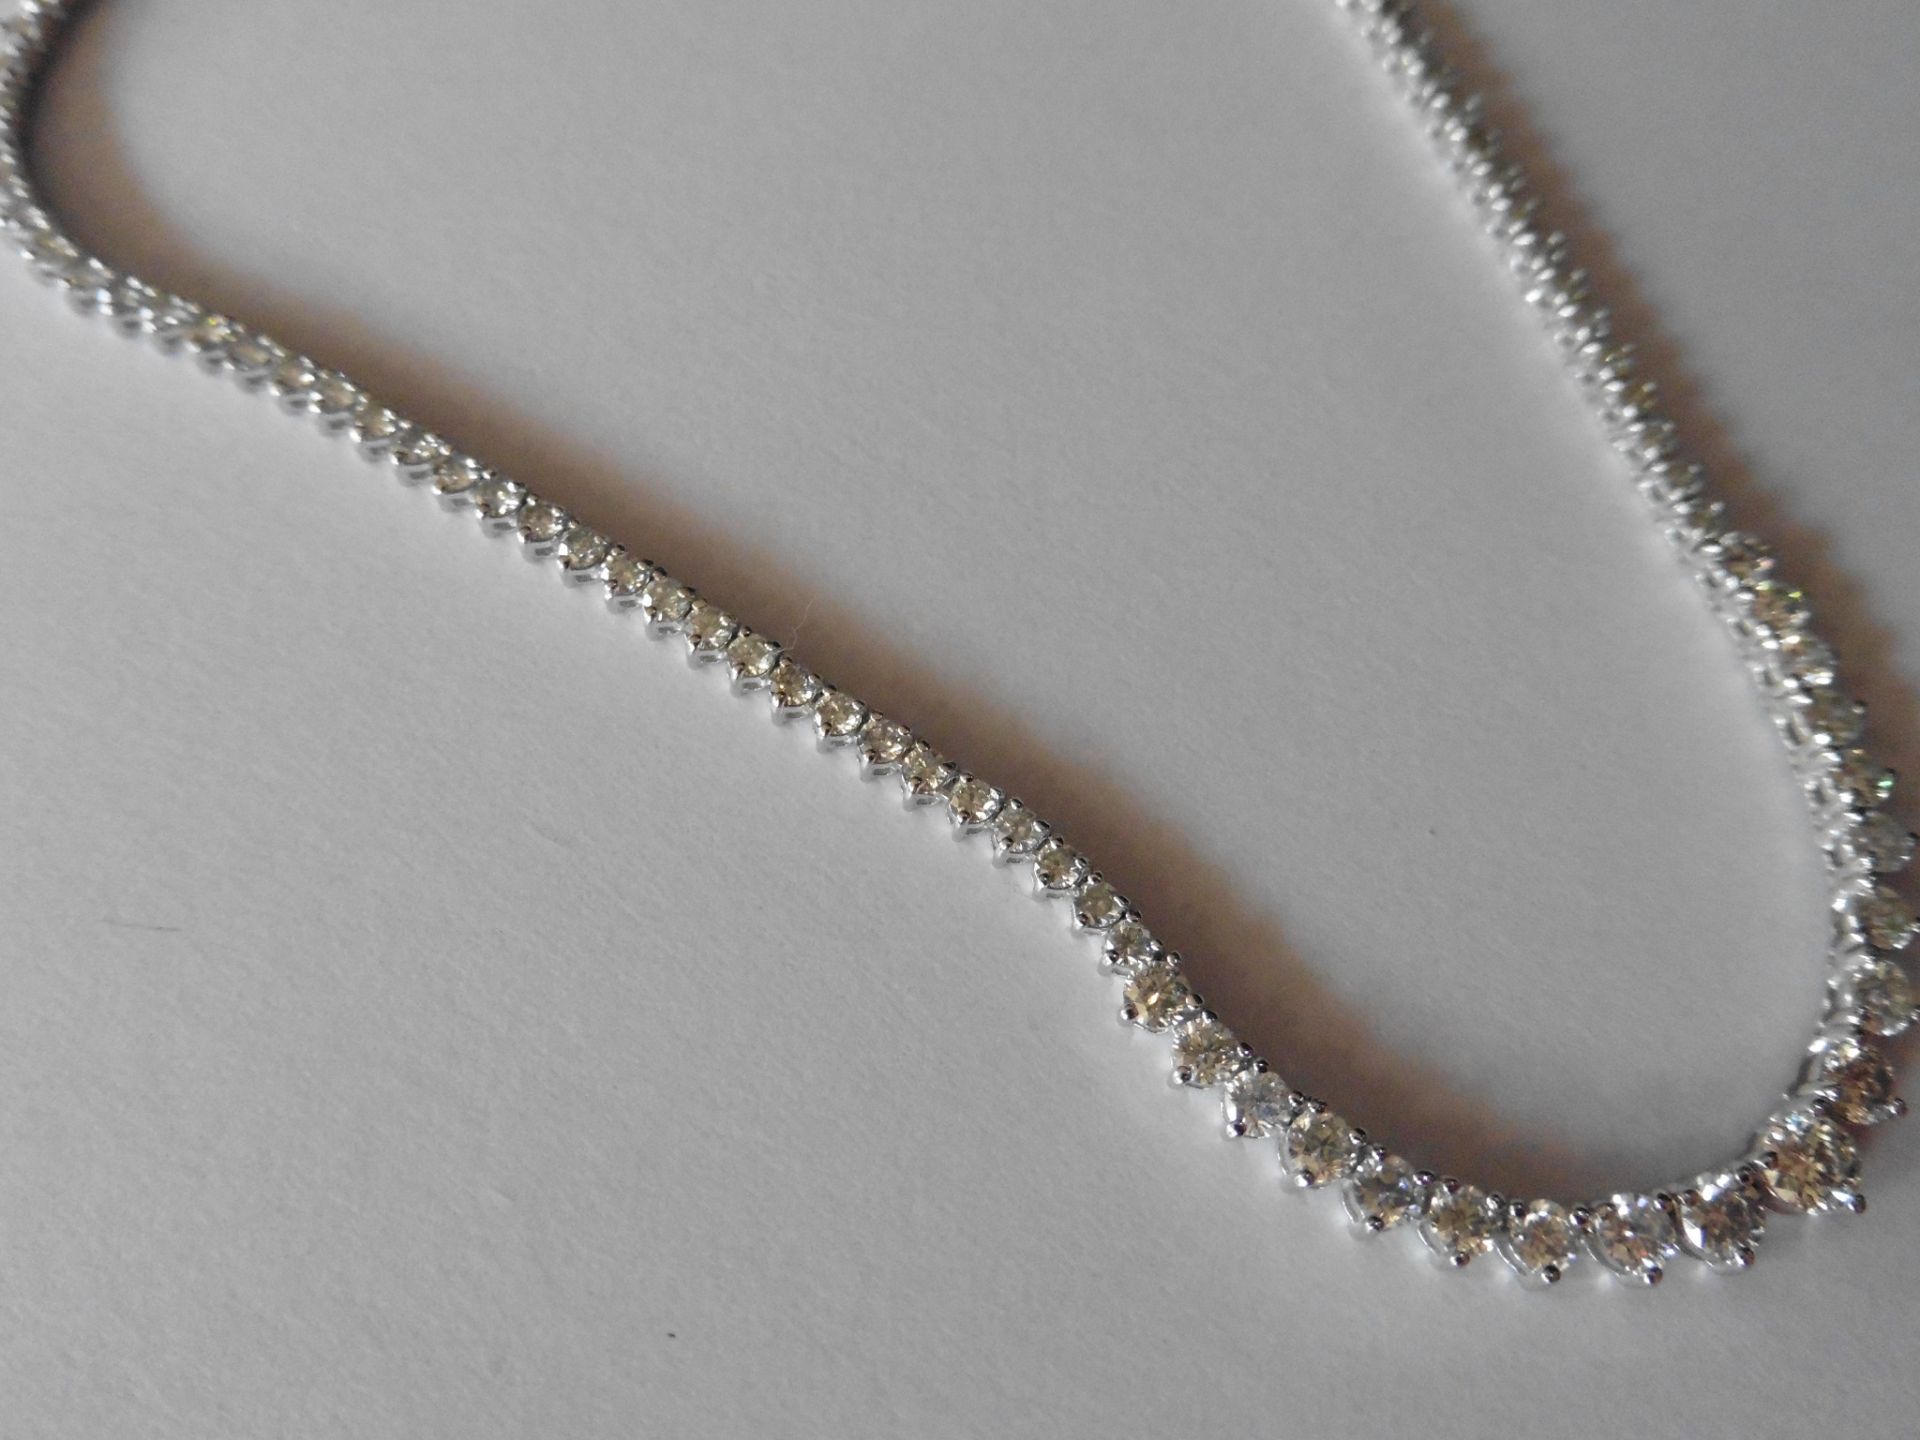 11.75ct Diamond tennis style necklace. 3 claw setting. Graduated diamonds, I colour, Si2 clarity - Image 2 of 3